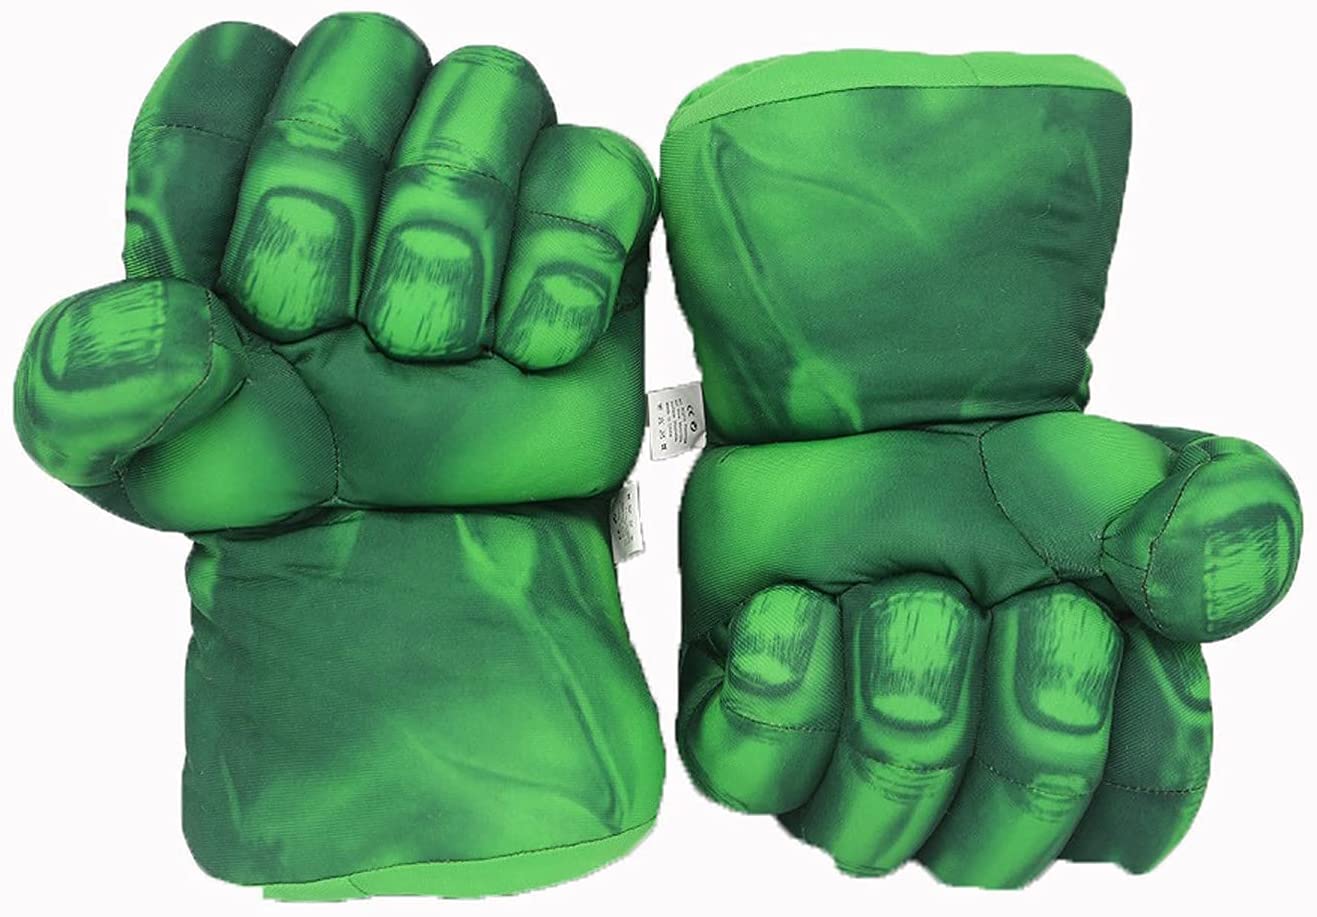 YINGLAIMEI Superhero Boxing Gloves Smash Fists,Incredible Superhero Soft Plush Toy Character Adult Hulk Hands,Birthday Gifts for Kids, Teenagers,Girls and